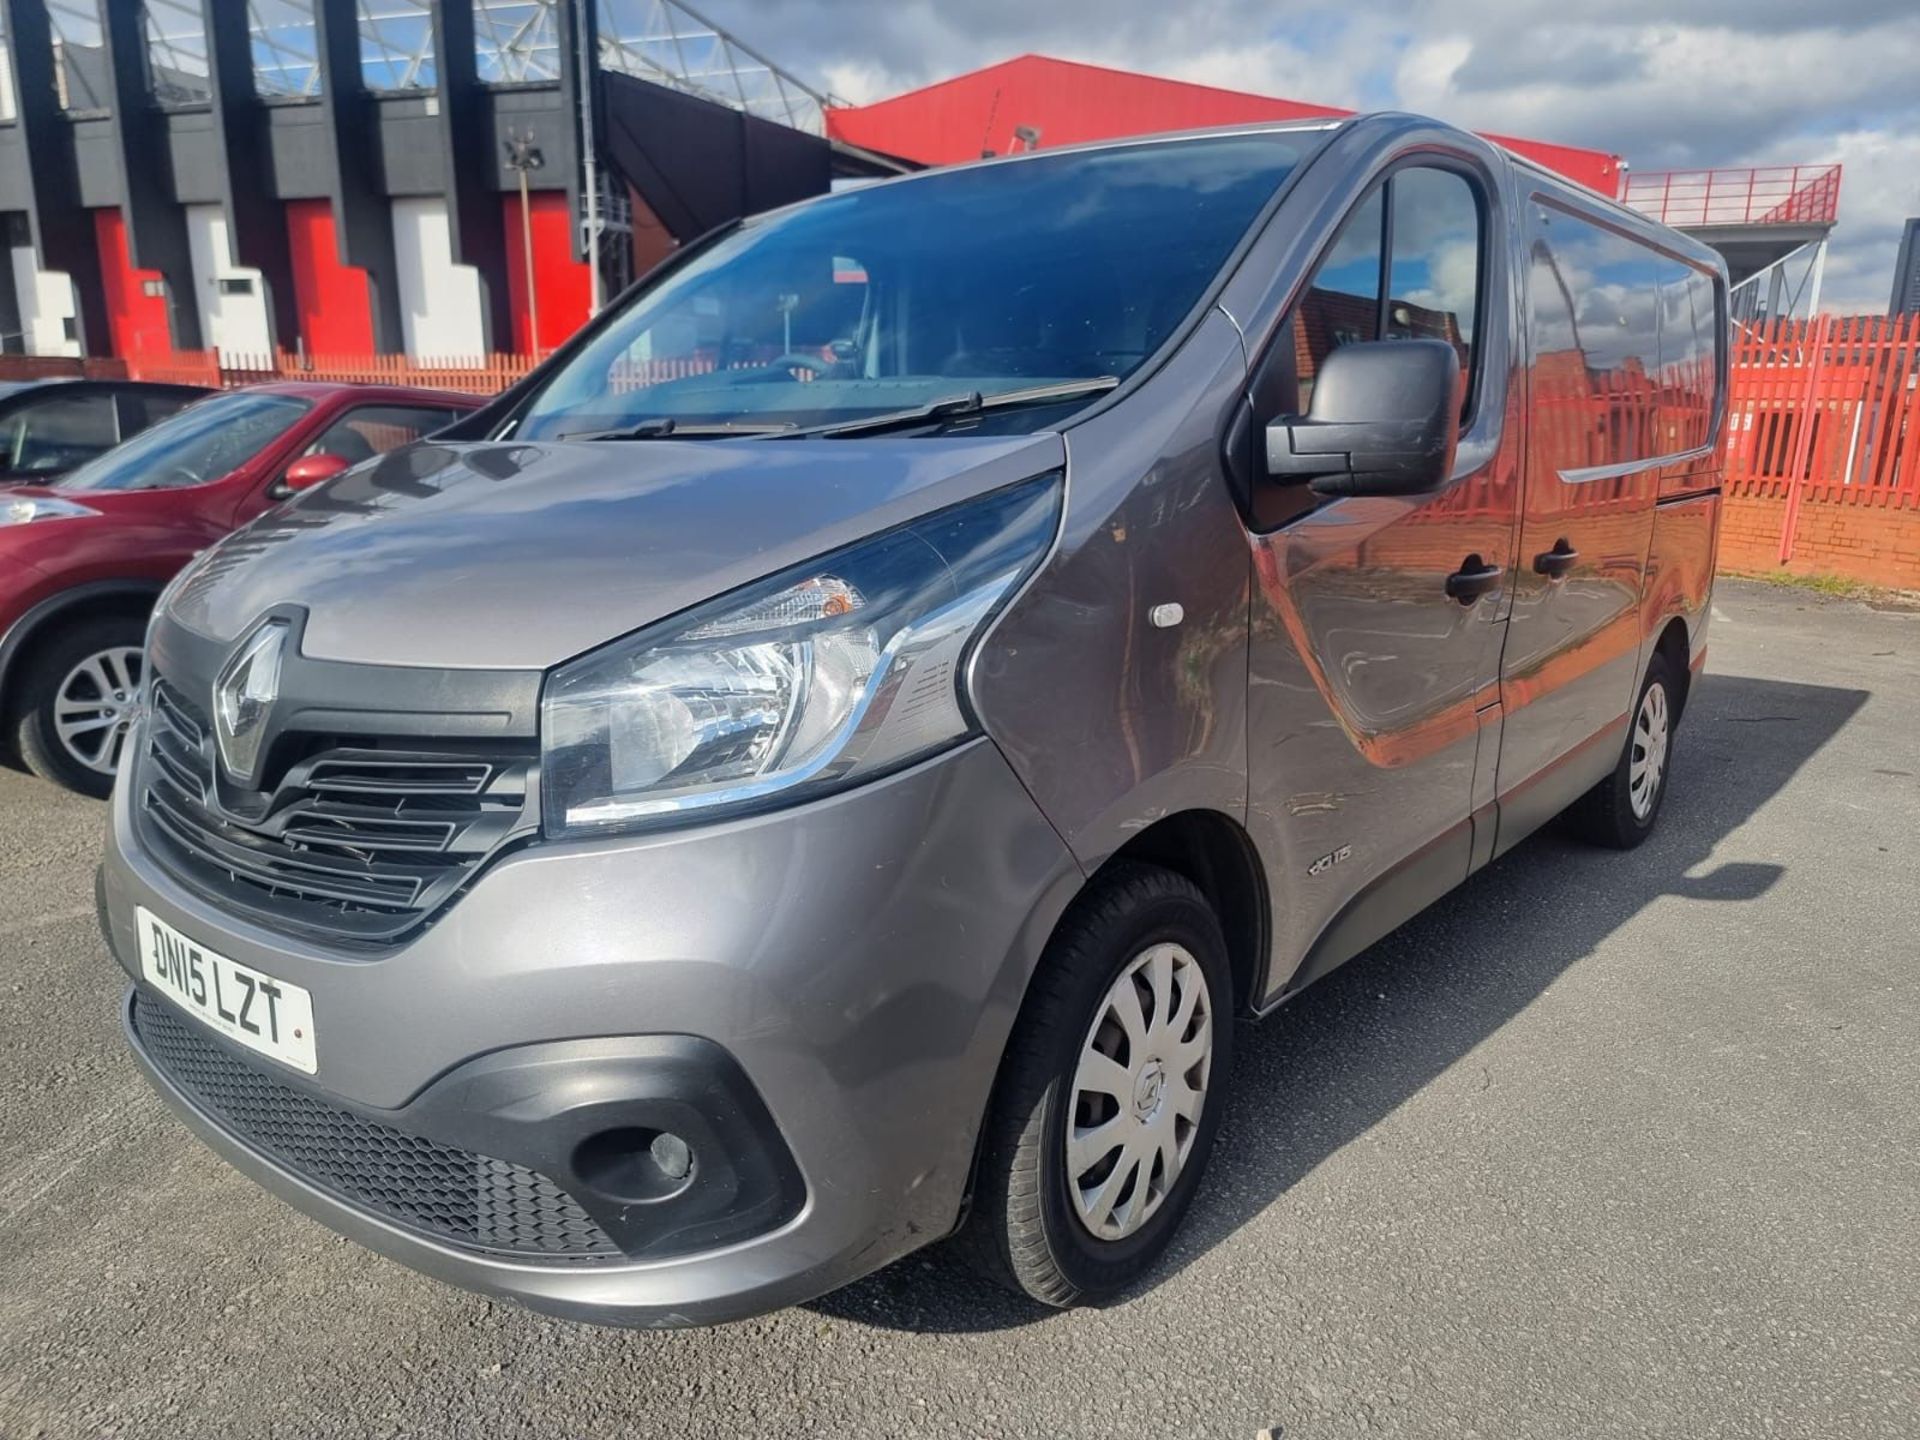 DN15 LZT RENAULT TRAFIC 2.7T 1.6 SL27 DCI 115 BUSINESS+ Panel Van. Comes with 1 key Date of - Image 6 of 7